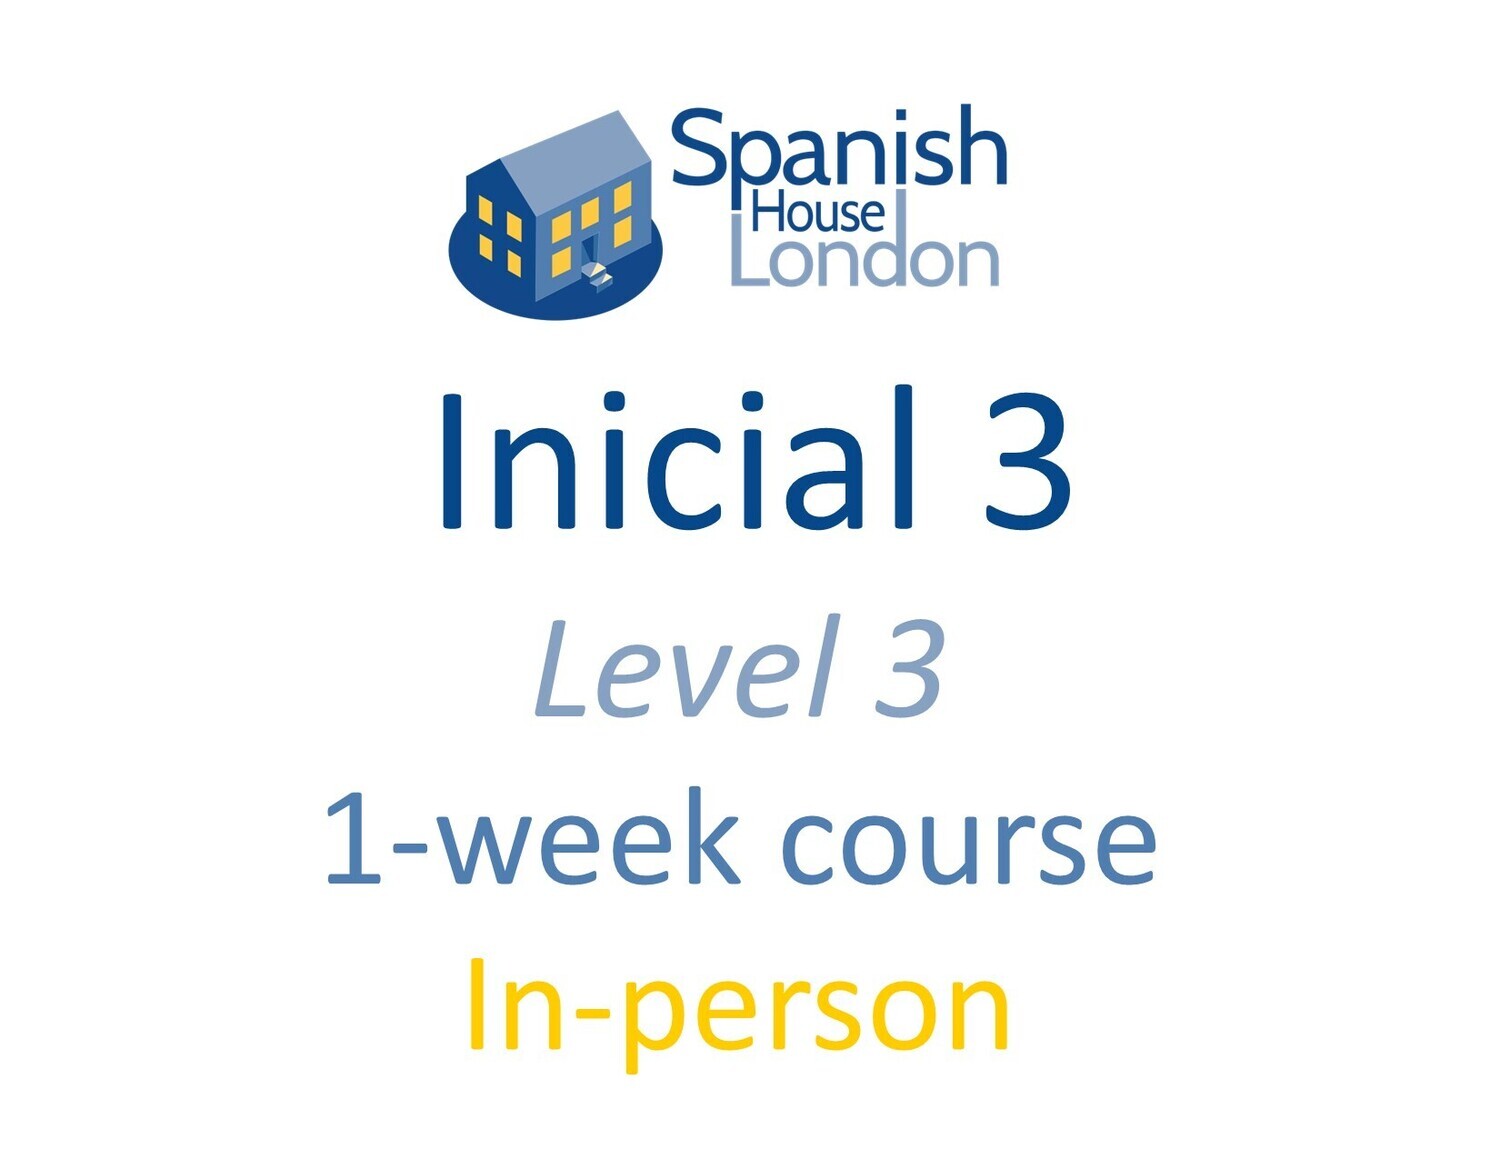 One-Week Intensive Inicial 3 Course starting on 30th October at 10.30am in Clapham North